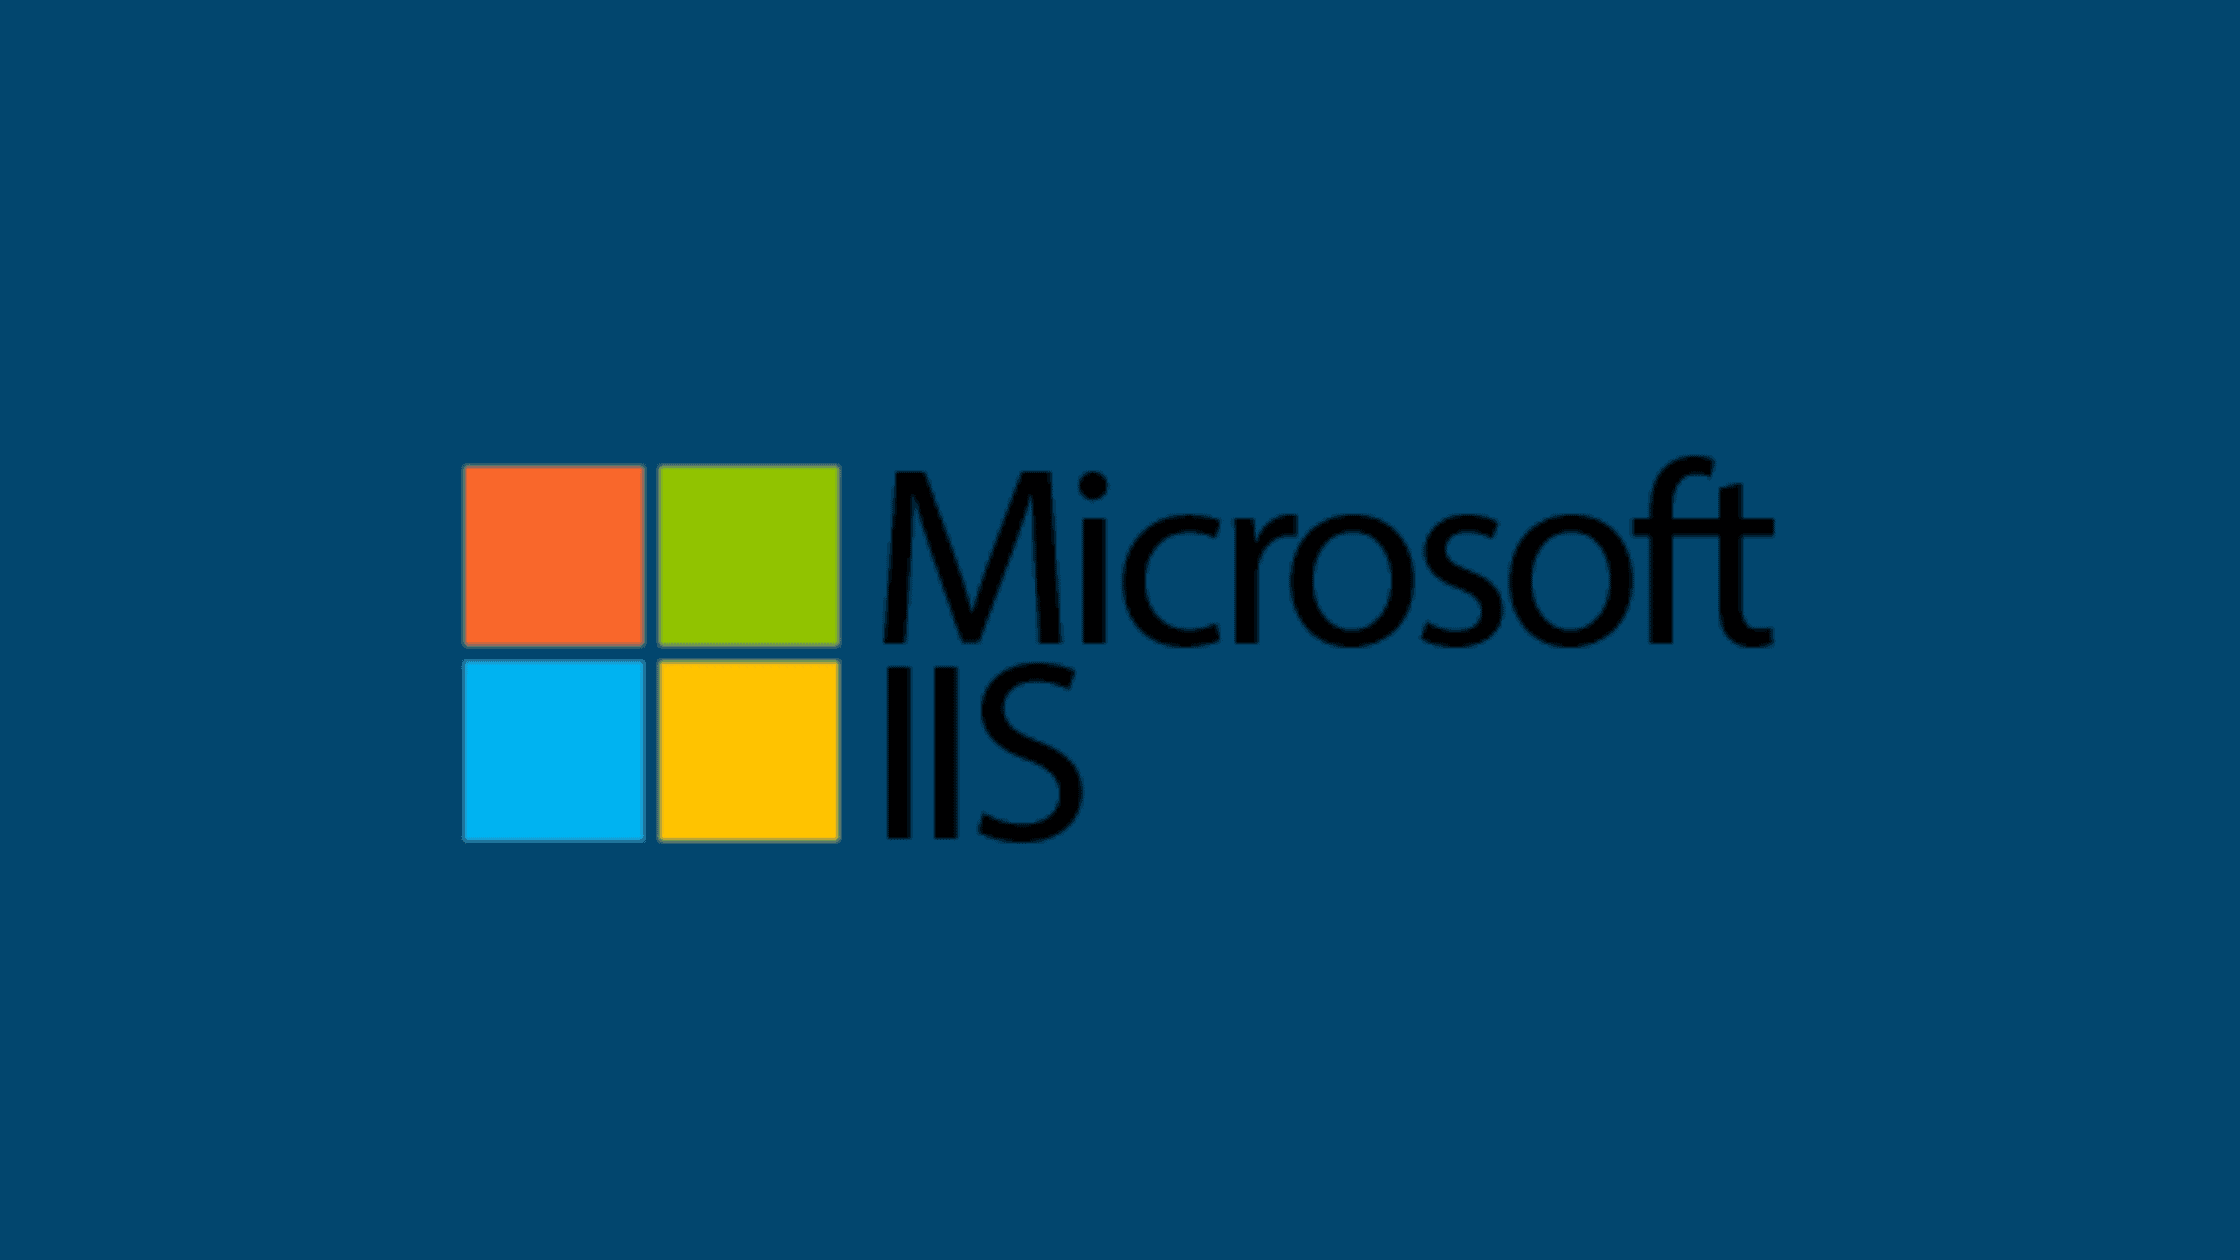 How To Install An Ssl Certificate On The Iis Server